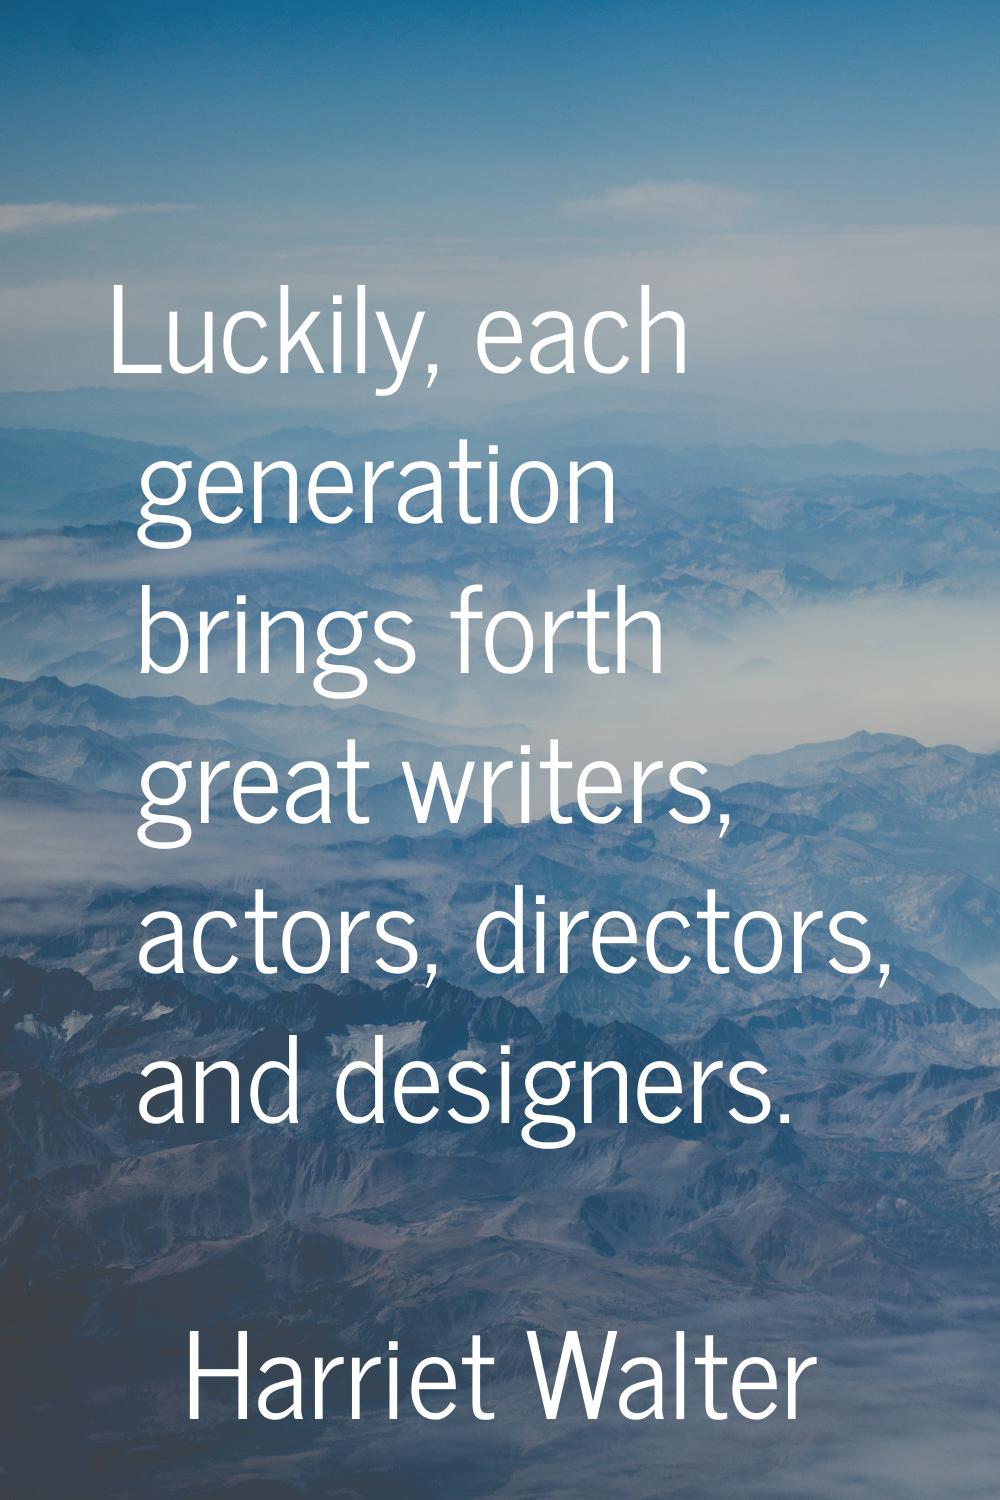 Luckily, each generation brings forth great writers, actors, directors, and designers.